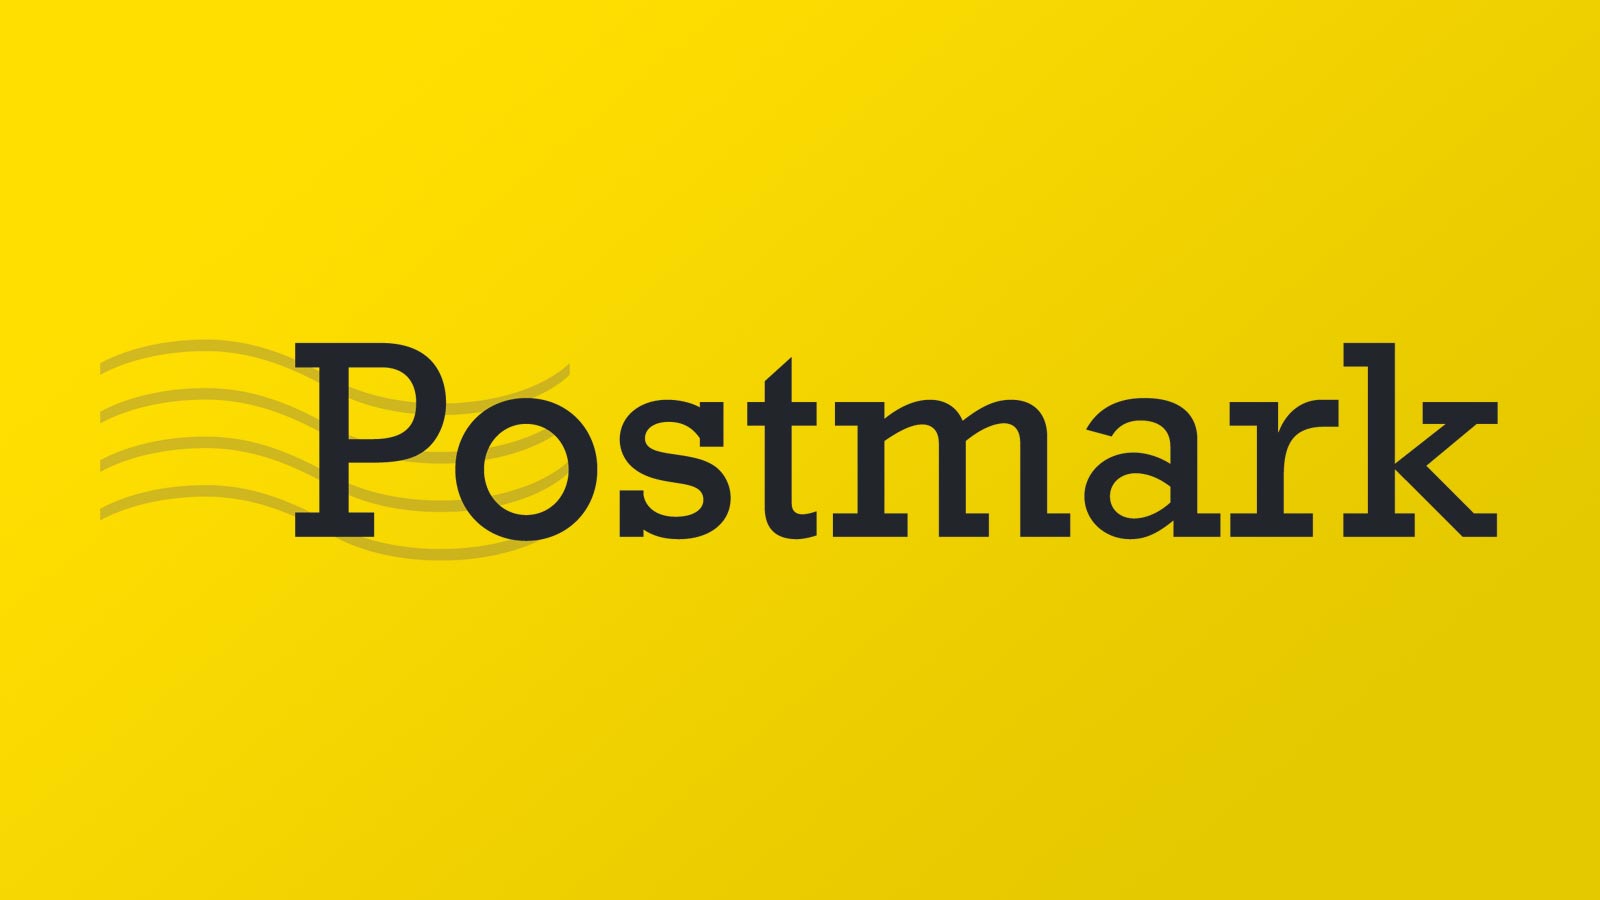 How to use custom HTML email templates with Postmark